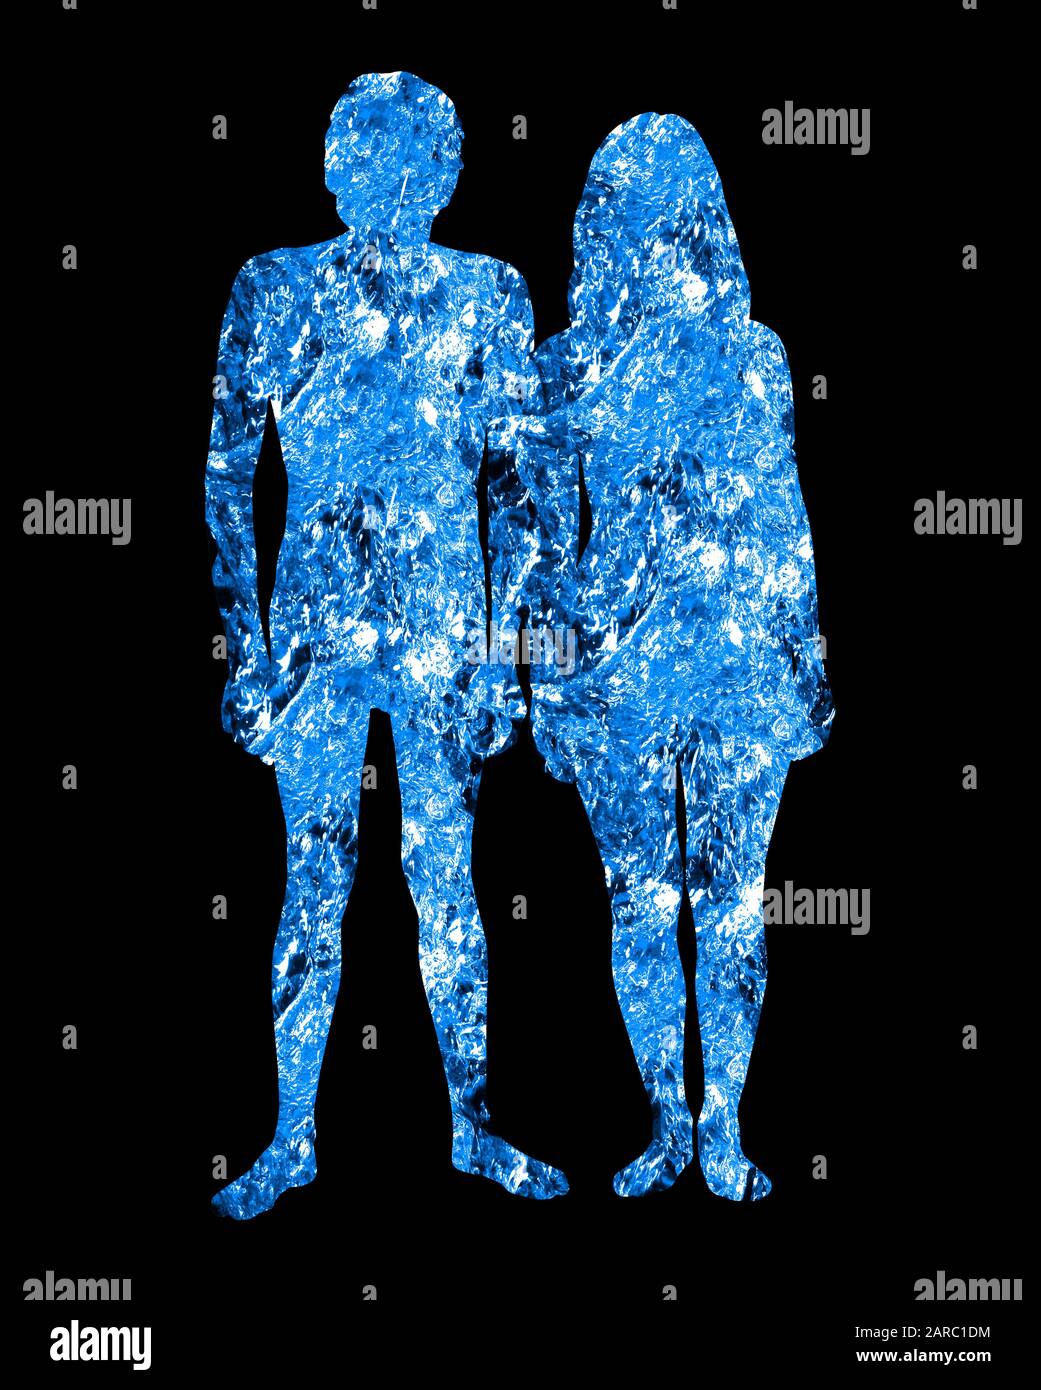 Water contained in human bodies. Stock Photo